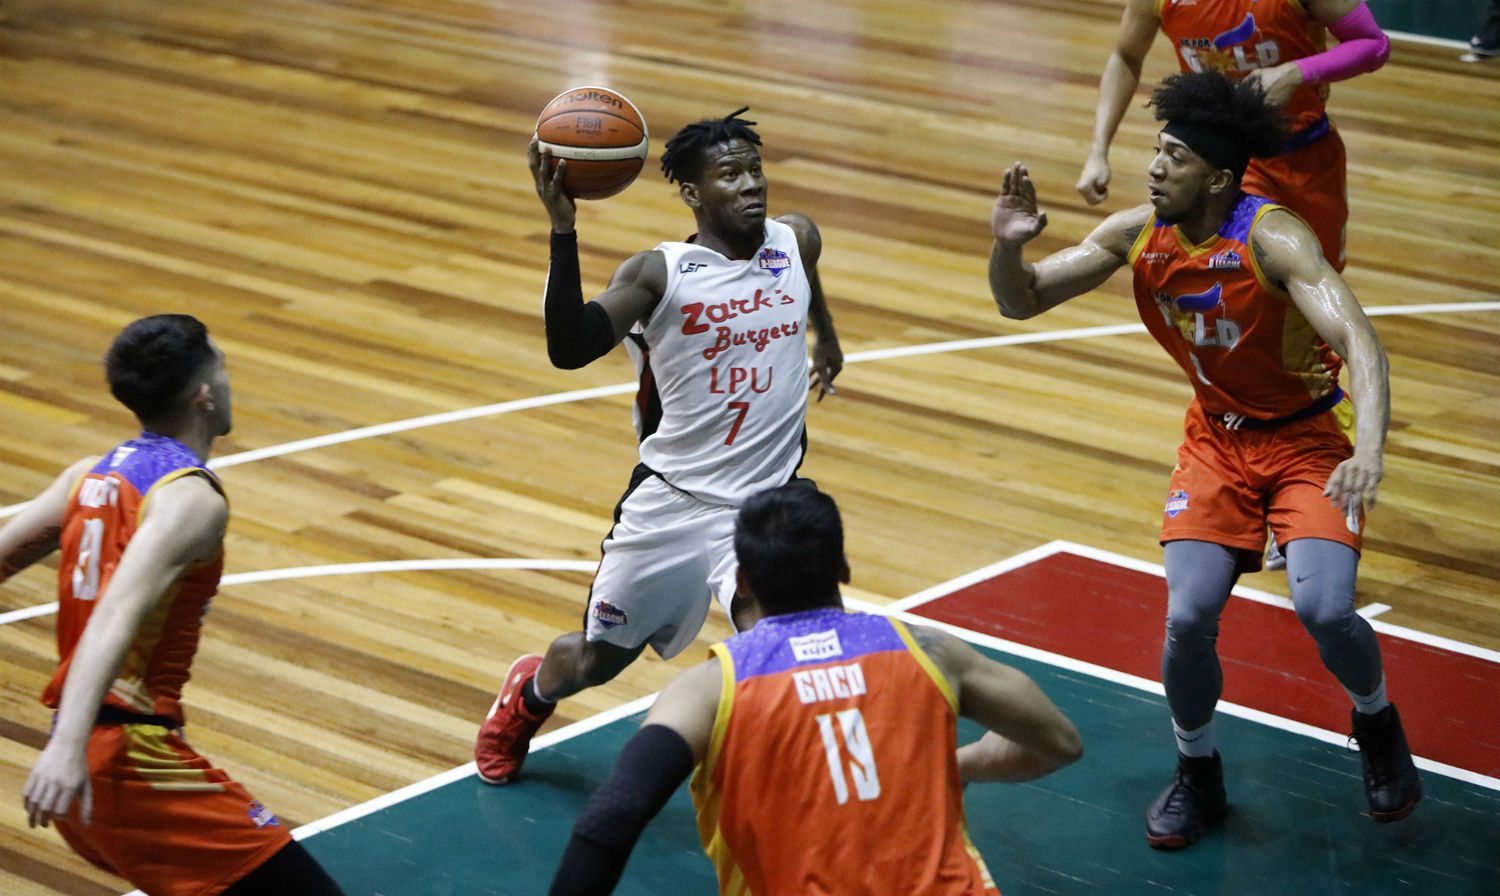 Zark’s-LPU snaps 3-game skid, downs Go For Gold-CSB in D-League